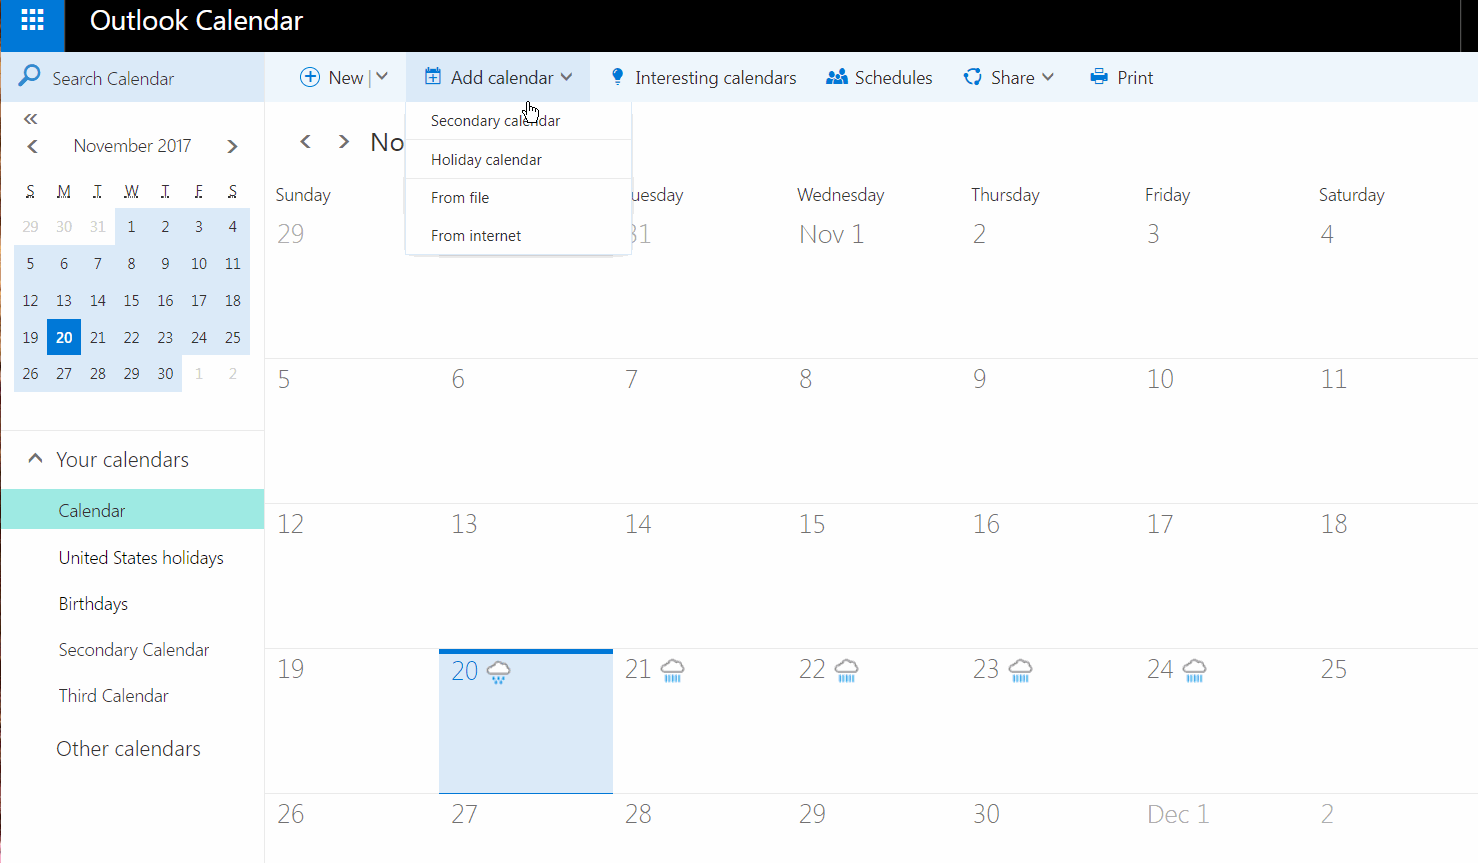 How do I set up multiple calendars in my Google or Outlook 365 account